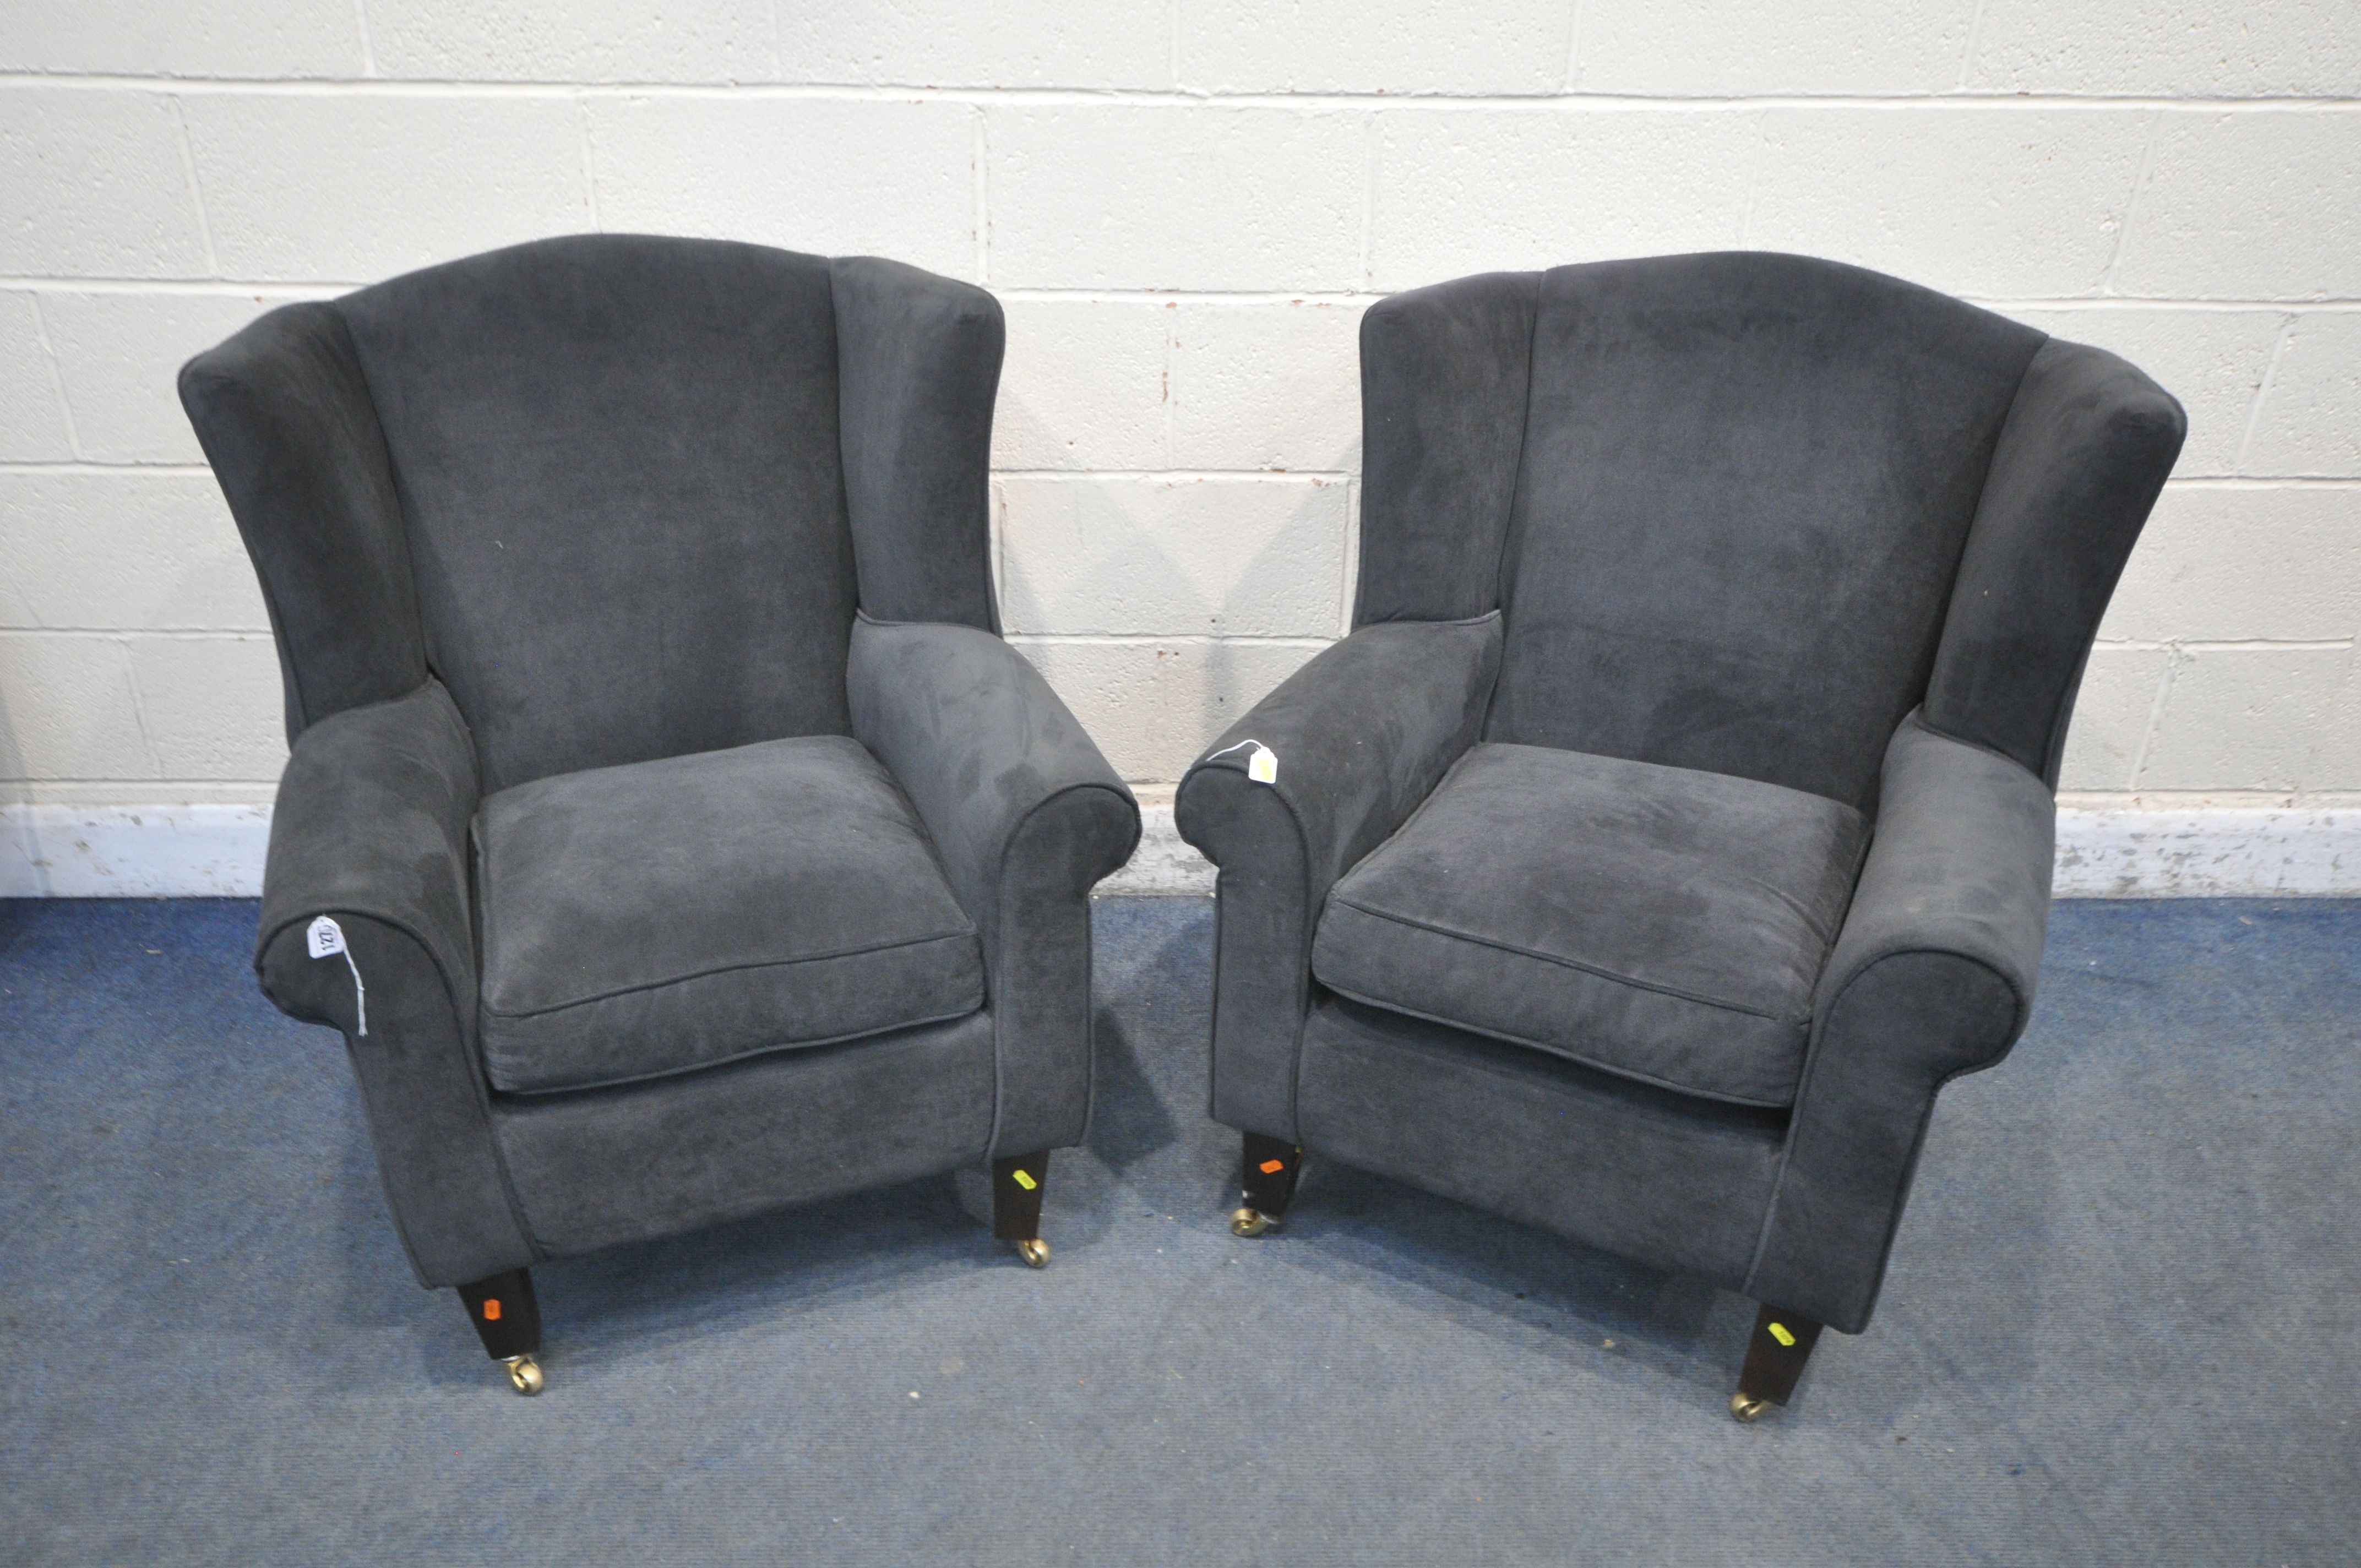 A PAIR OF DARK BLUE UPHOLSTERED ARMCHAIRS, along with a brown footstool (condition report: in need